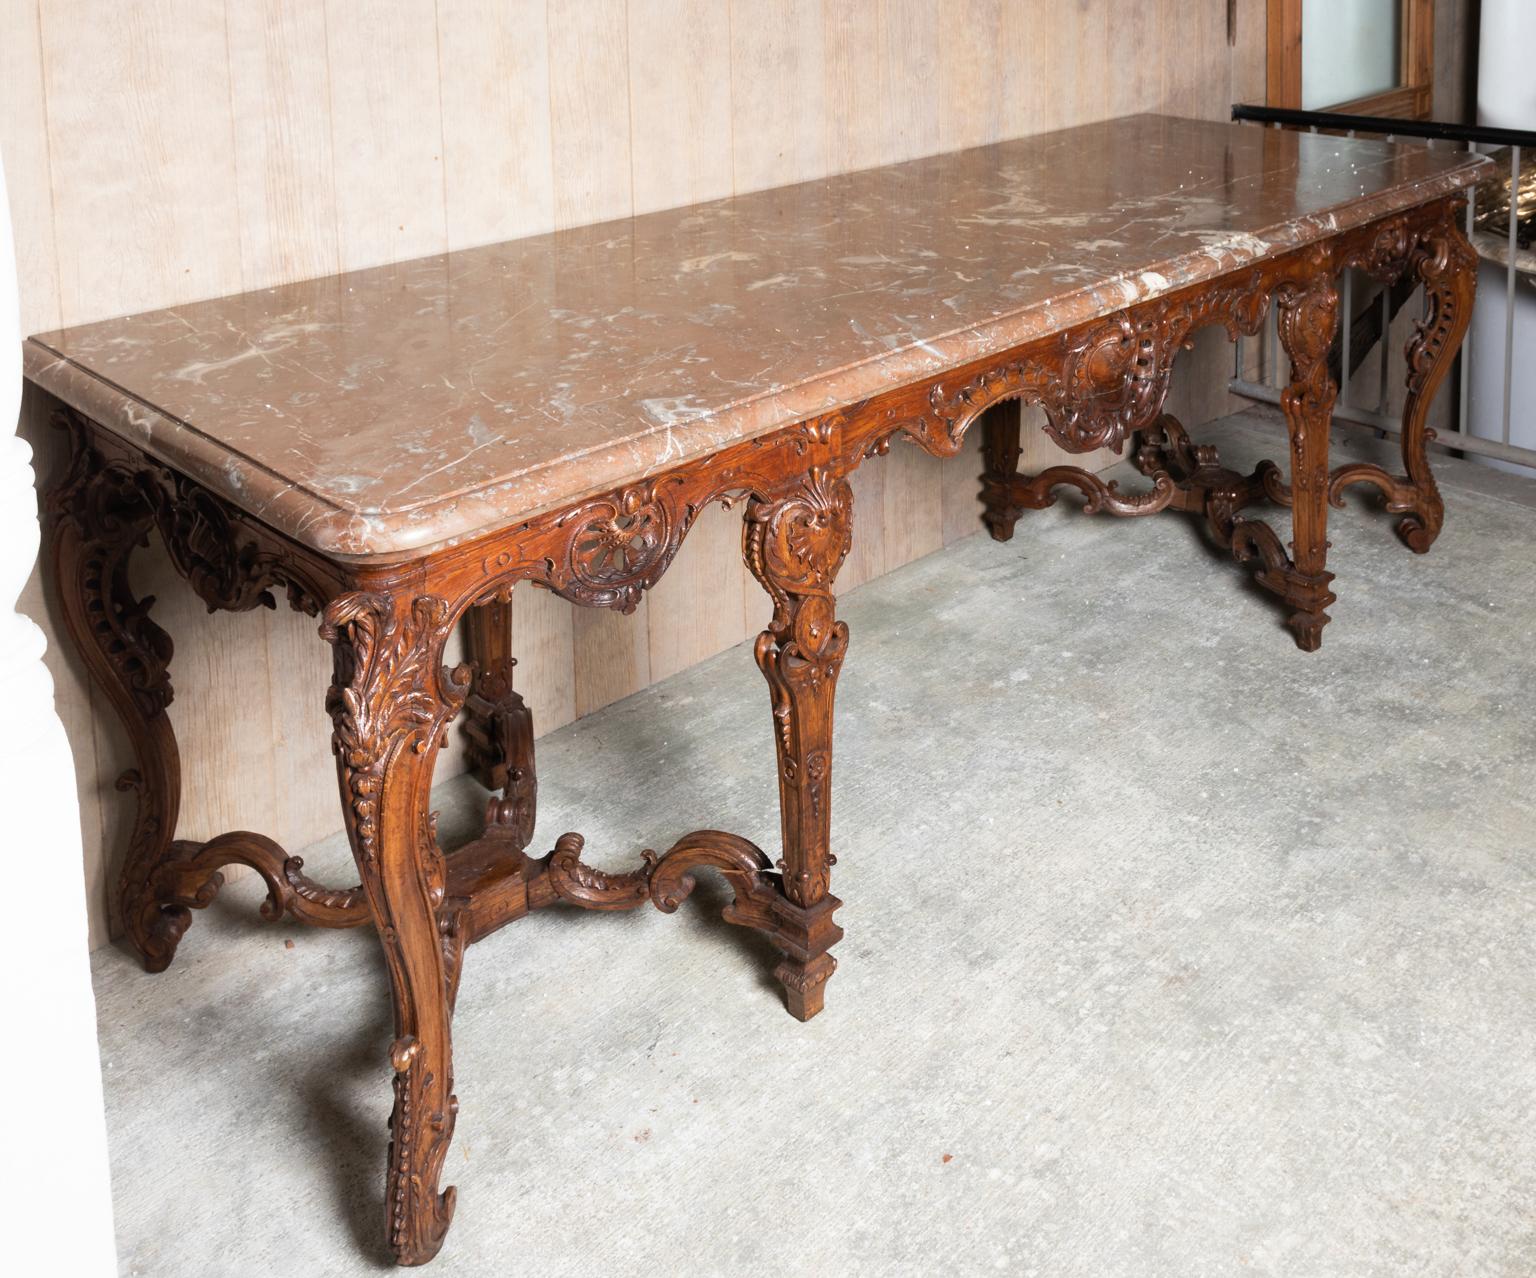 Large hall sized French Rococo style marble top console table for the hall with heavily carved scrolled foliage and shell work throughout. The piece of marble is also entirely one slab. Please note of wear consistent with age including scratches and